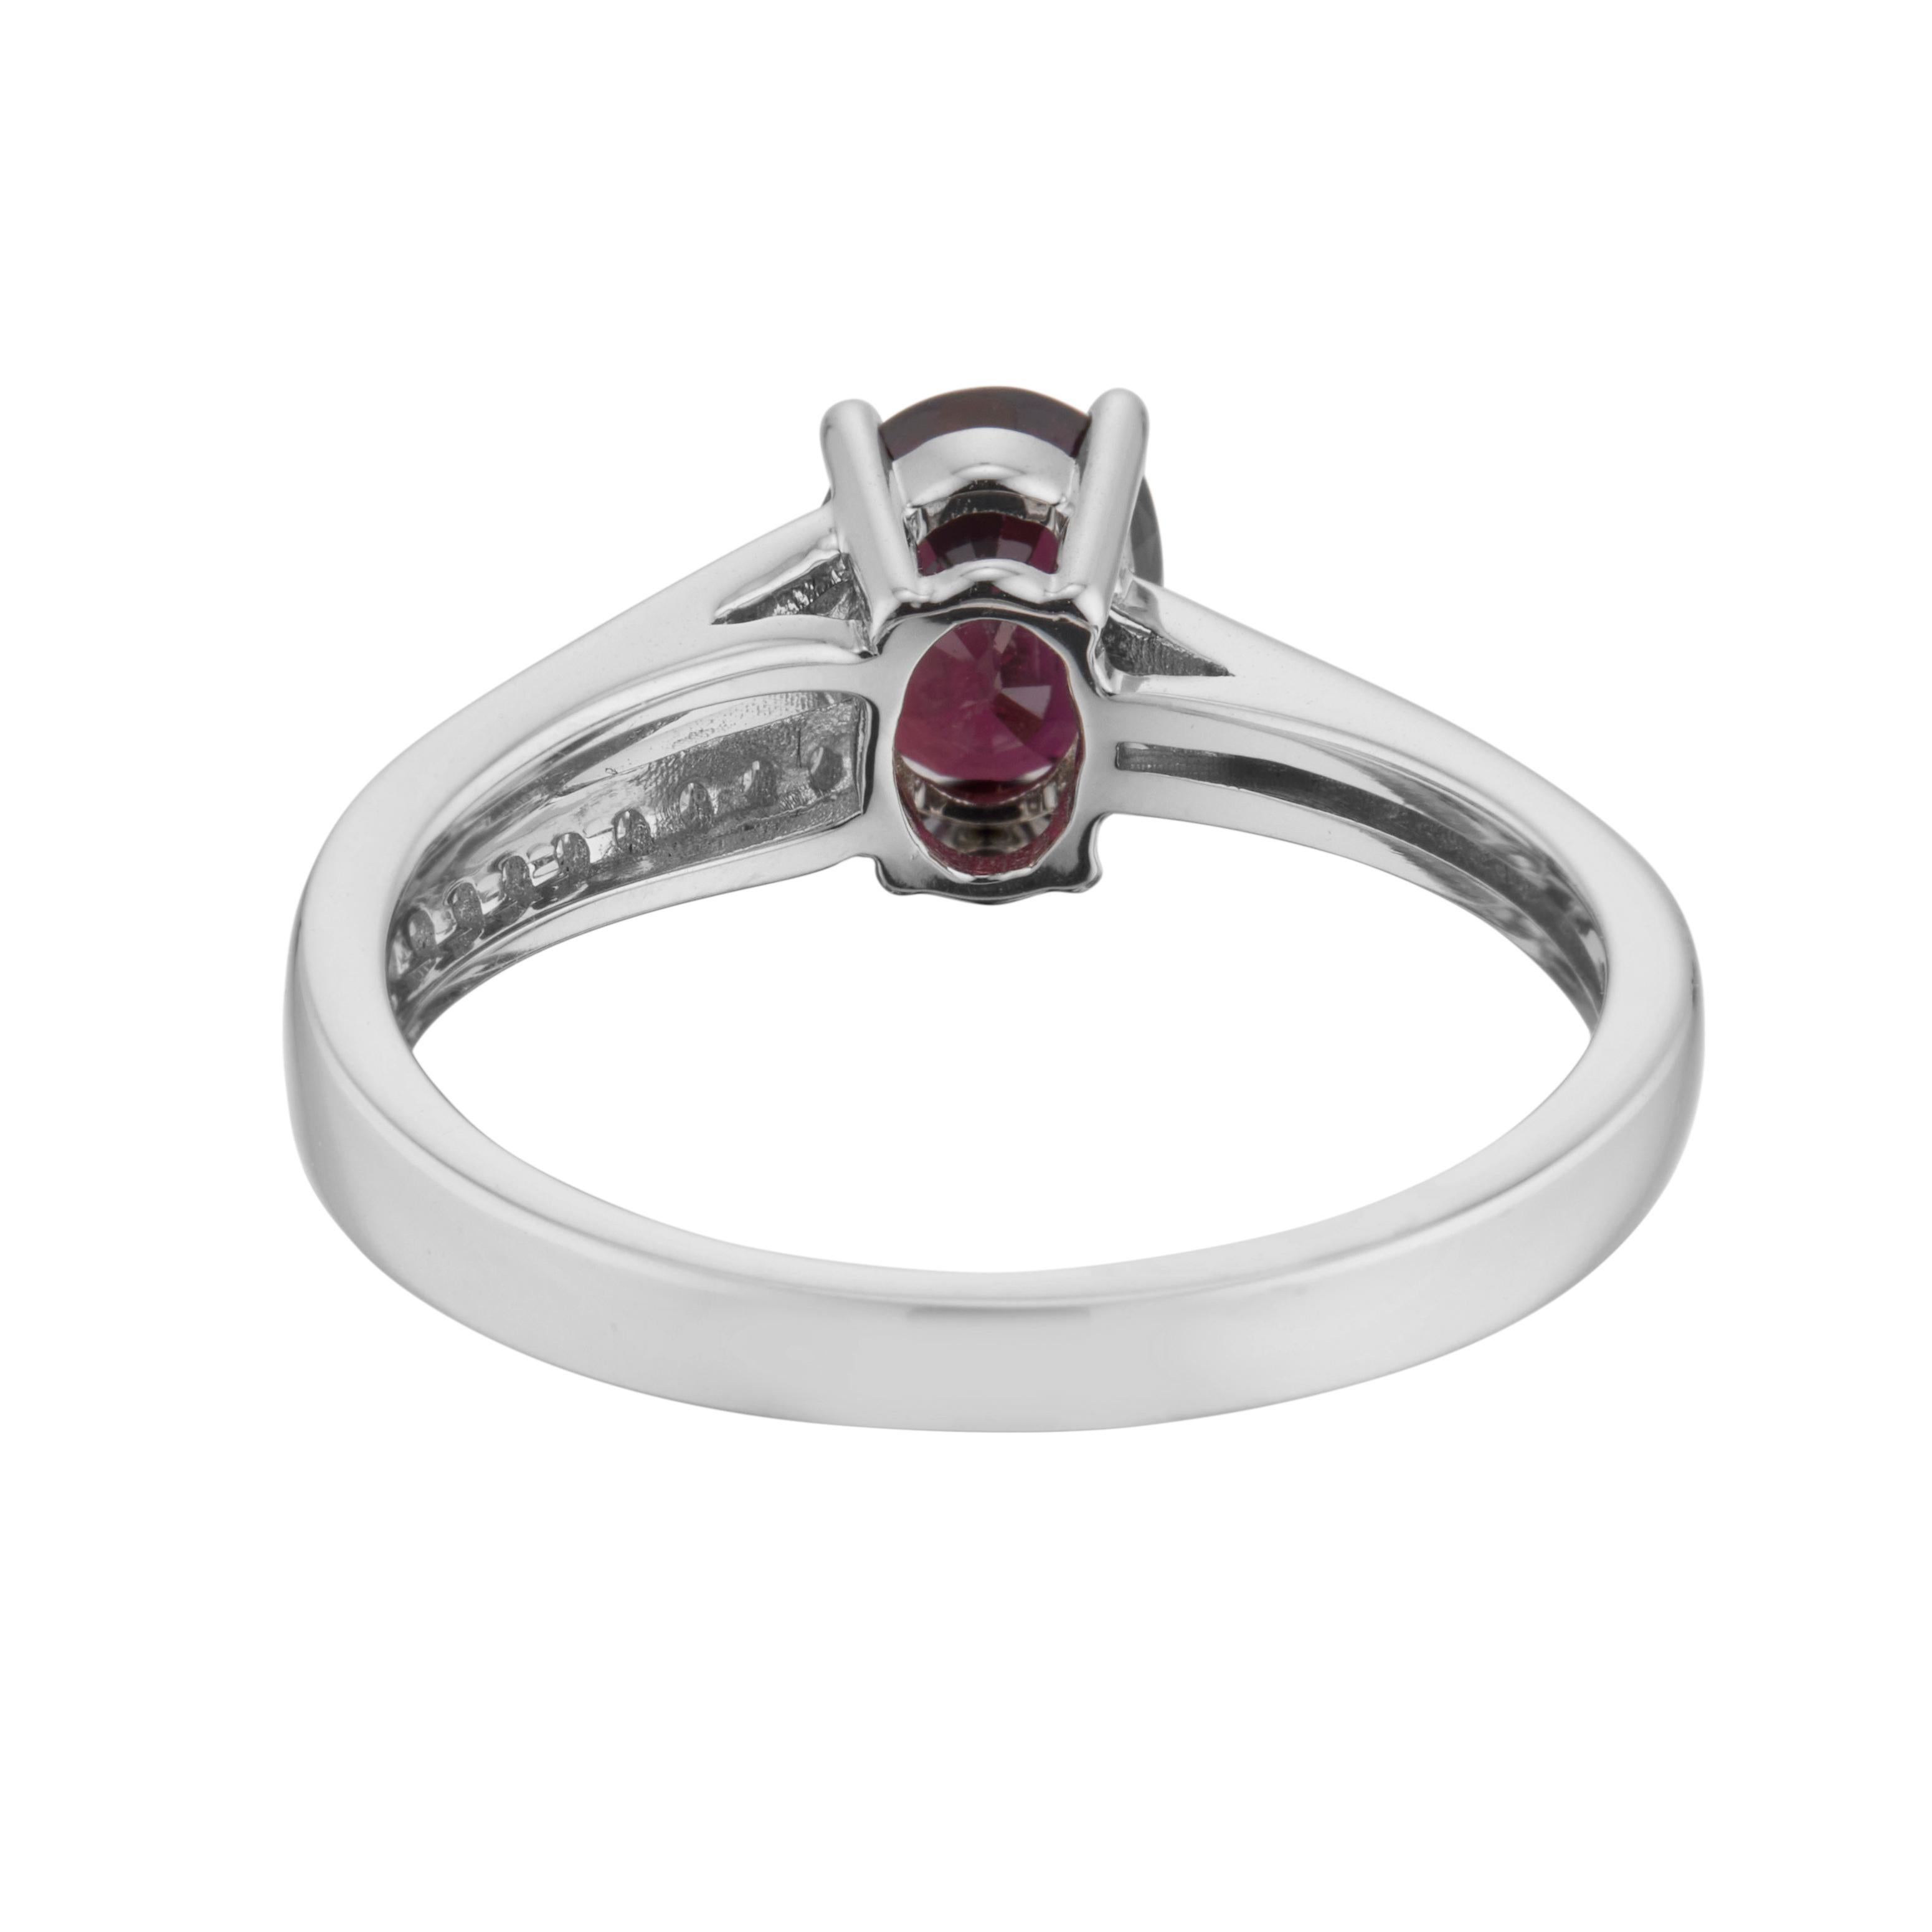 1.35 Red Ruby Diamond White Gold Engagement Ring  In Excellent Condition For Sale In Stamford, CT